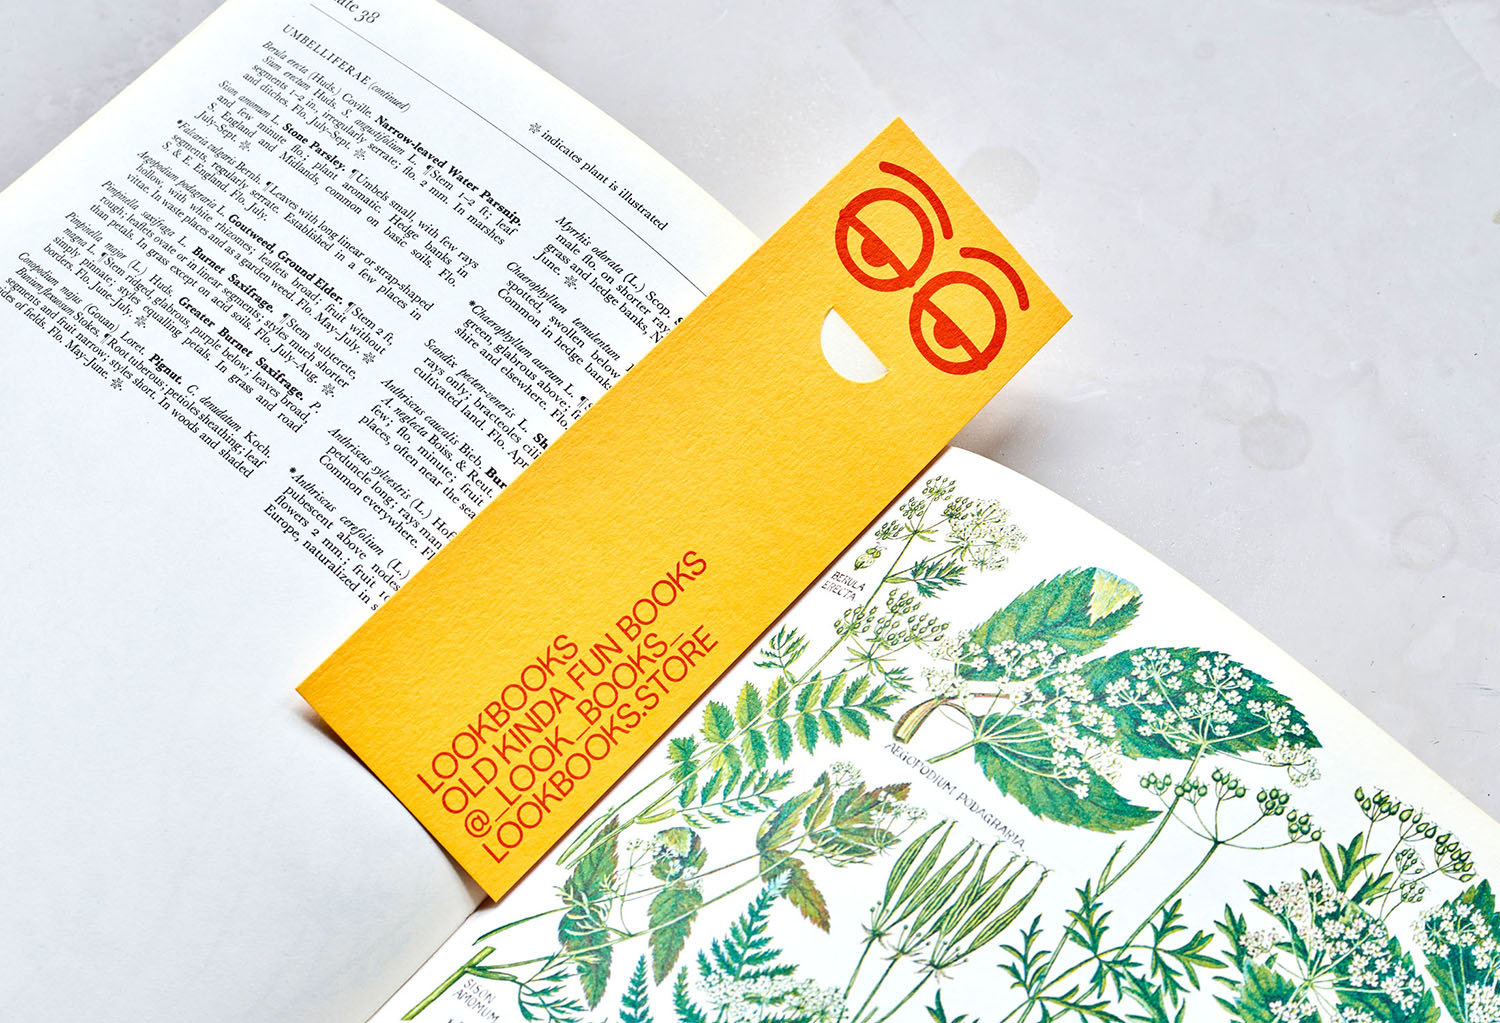 Visual identity design and bookmarks by London-based Studio Lowrie for online speciliast bookstore Look Books